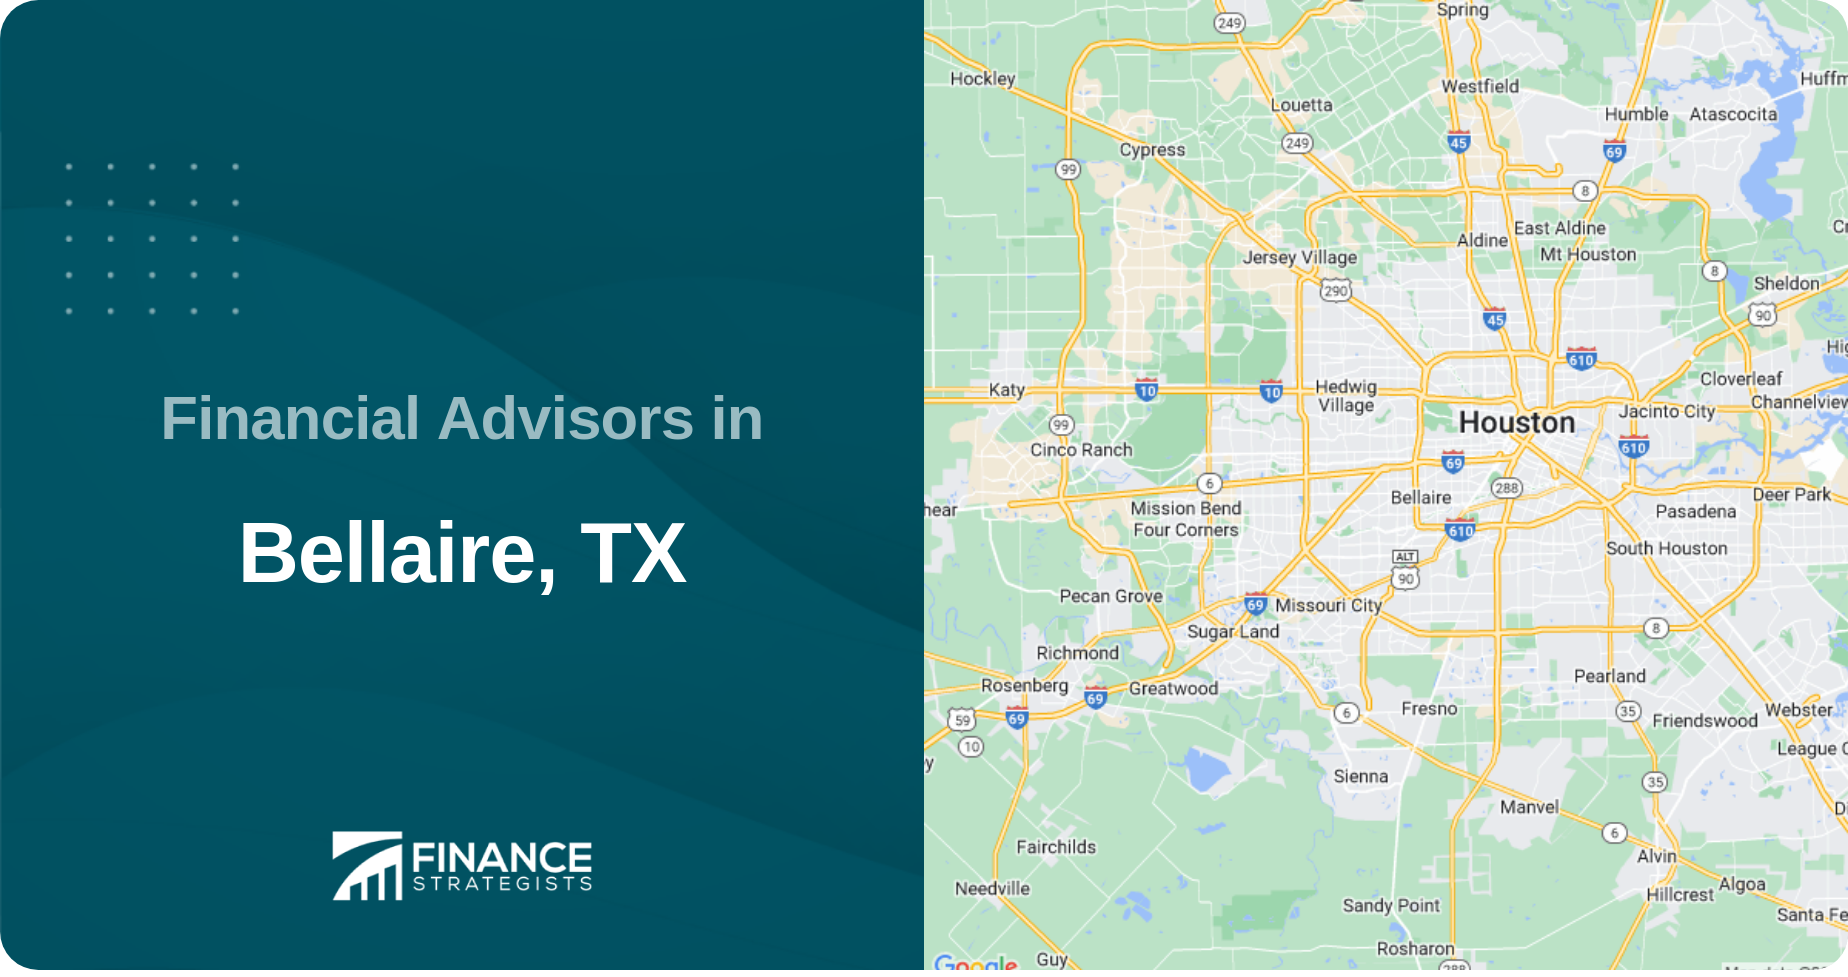 Financial Advisors in Bellaire, TX